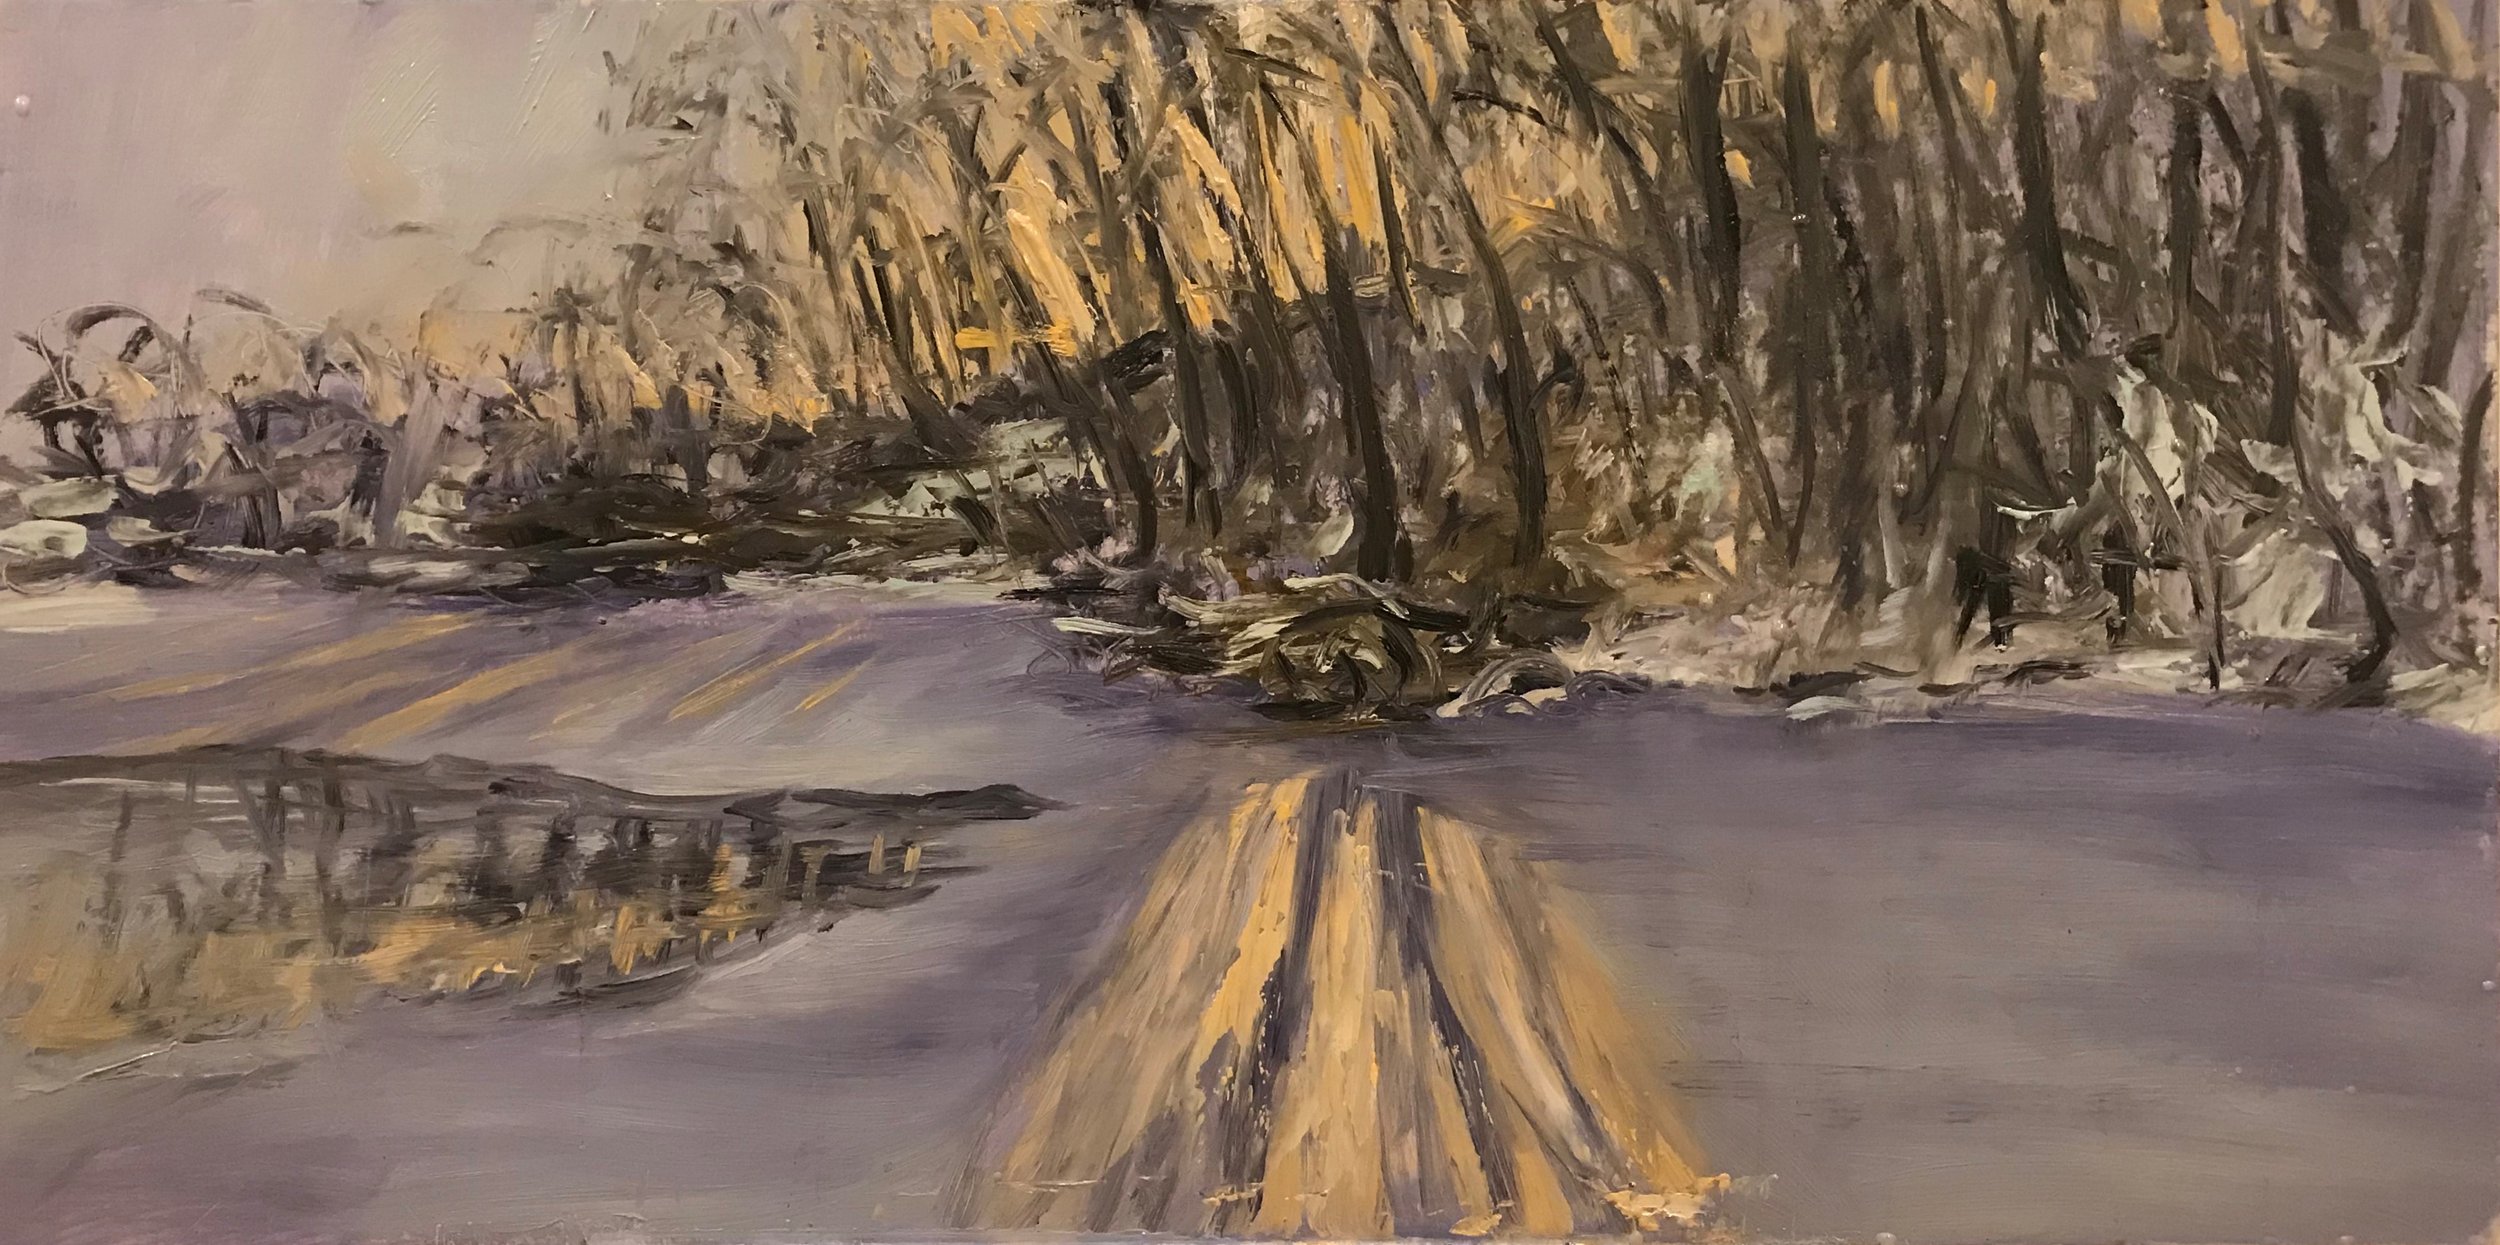 20-12-18 Peter’s Pond  different light.  Different Angle  12 x 24 inches.jpg